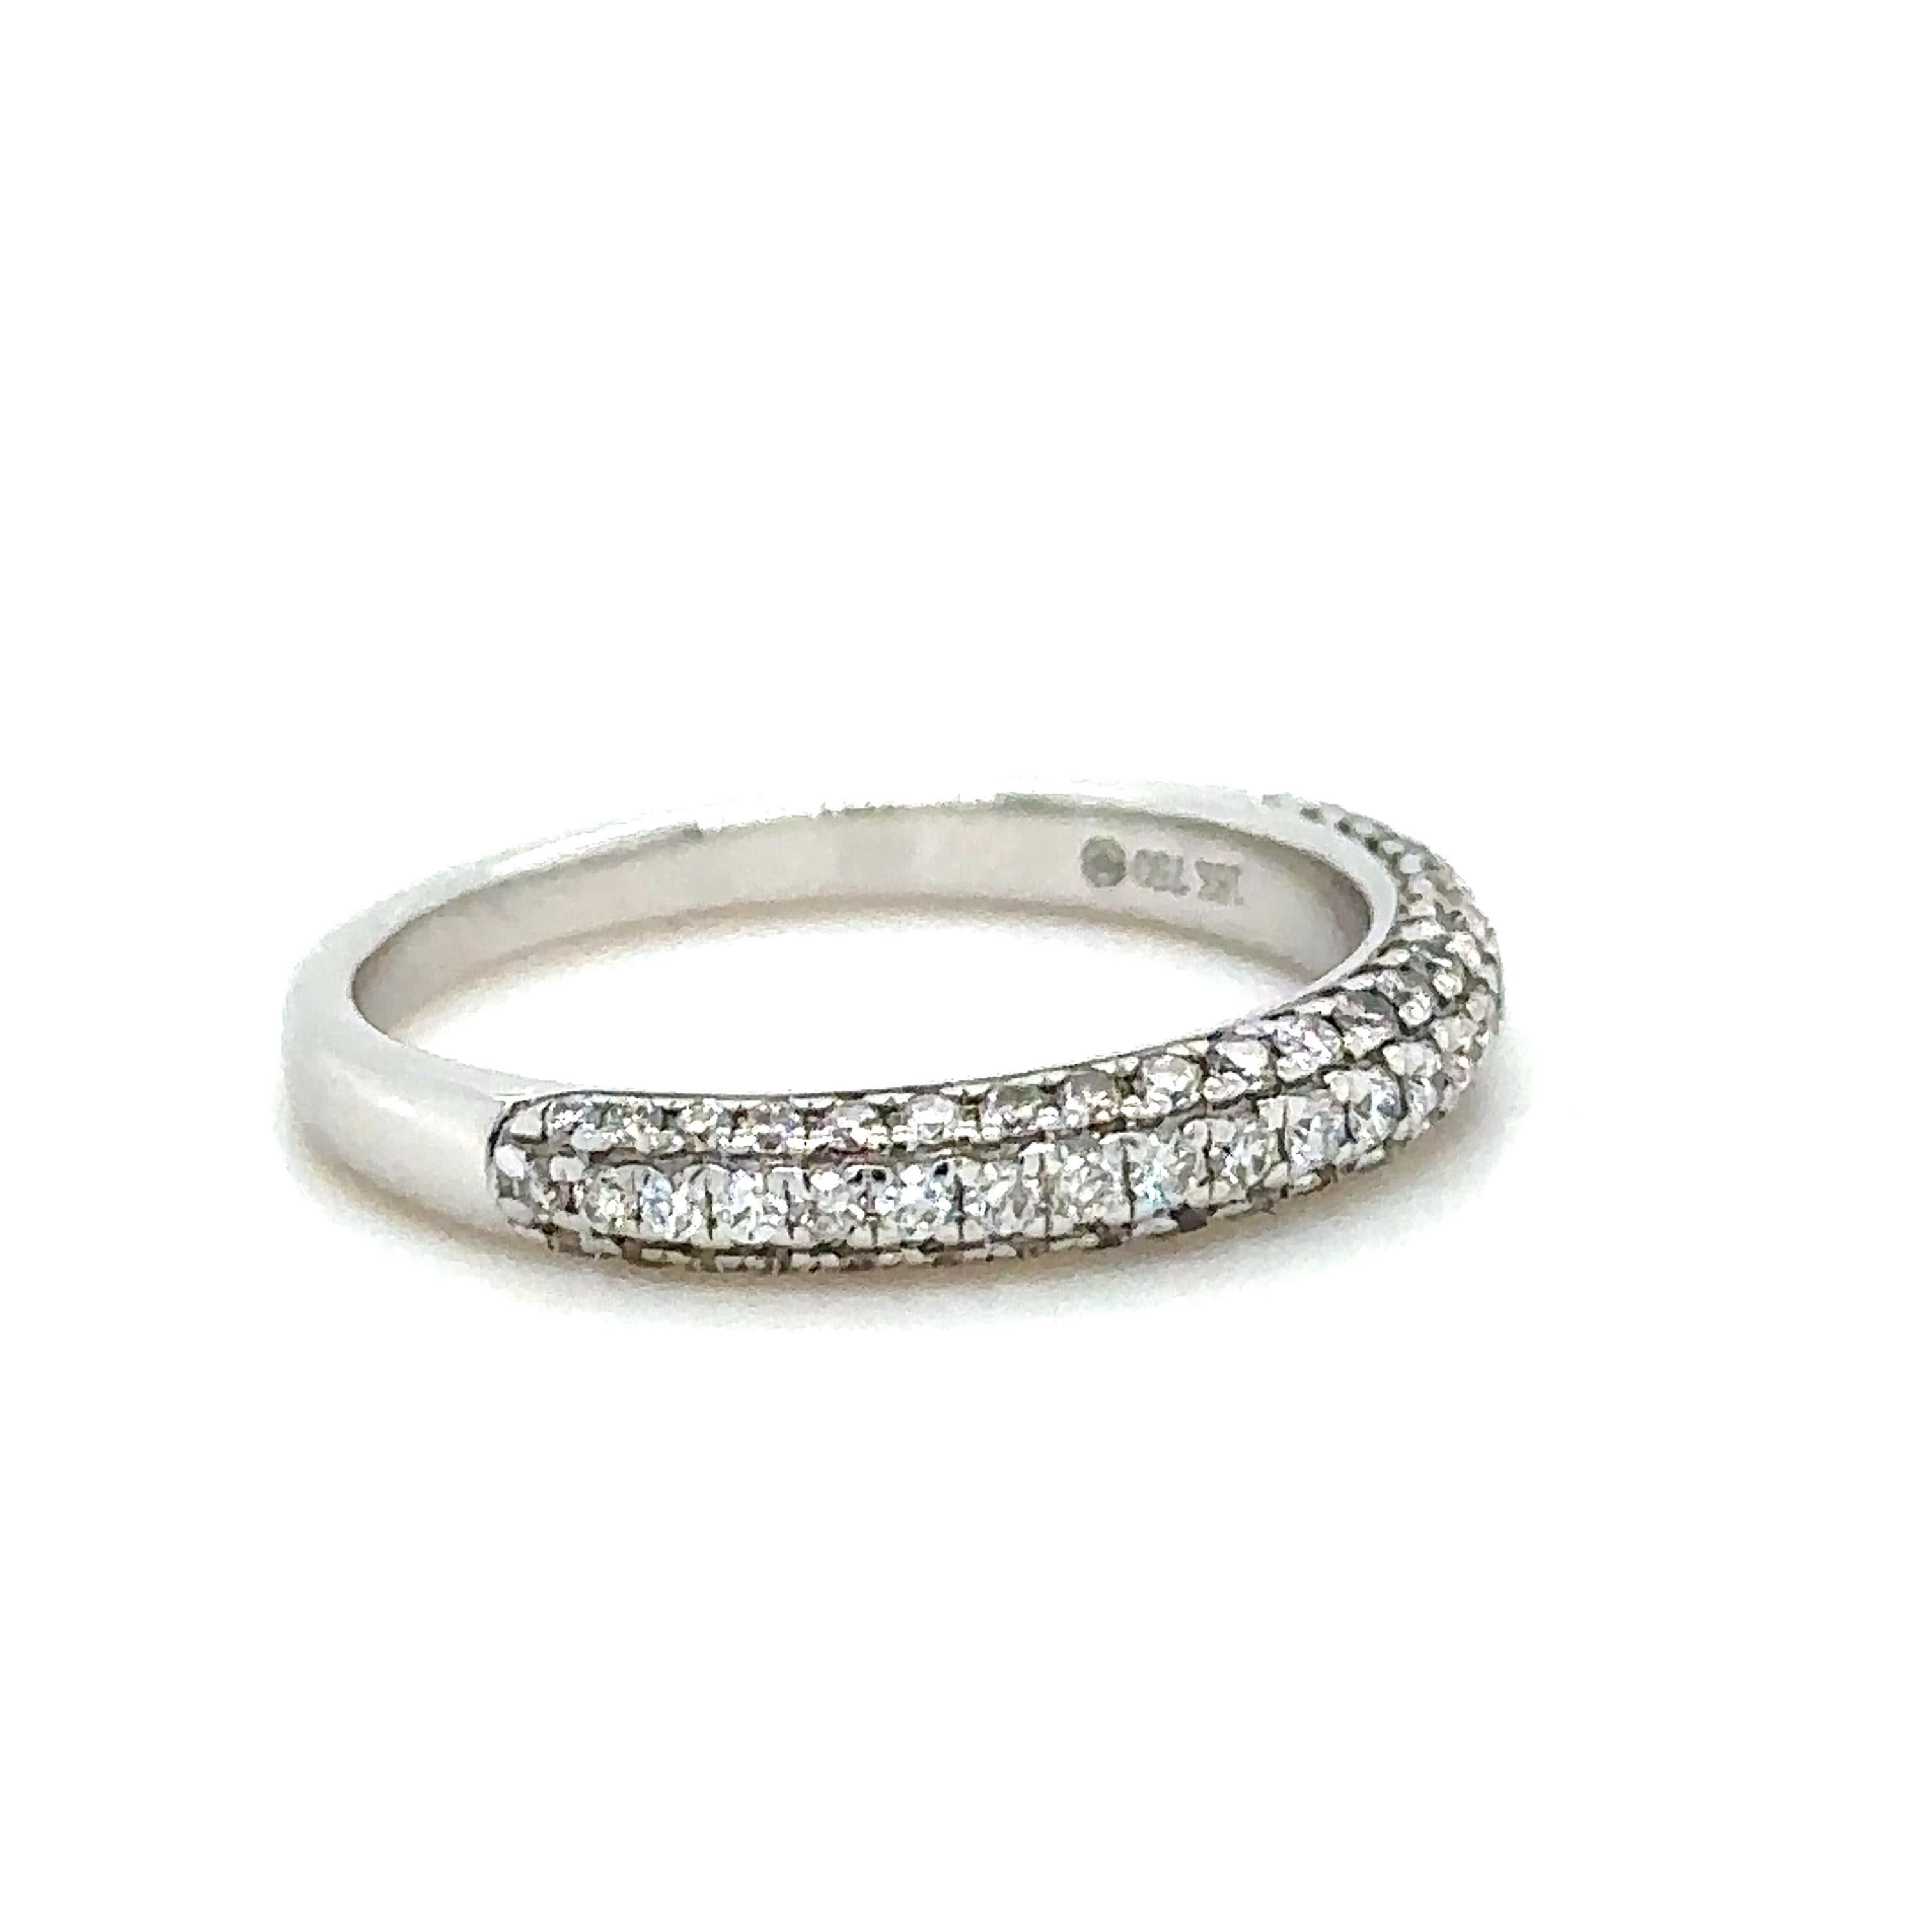 Unique features:

Diamond half eternity band. Made of 18 kt White Gold, in a pave setting, and weighing 2.8gm. Stamped: 18K 750.

Set with 67 round, brilliant cut Diamonds, colour F-G and clarity VS-SI. with a total weight of 0.44ct.

Metal: 18ct